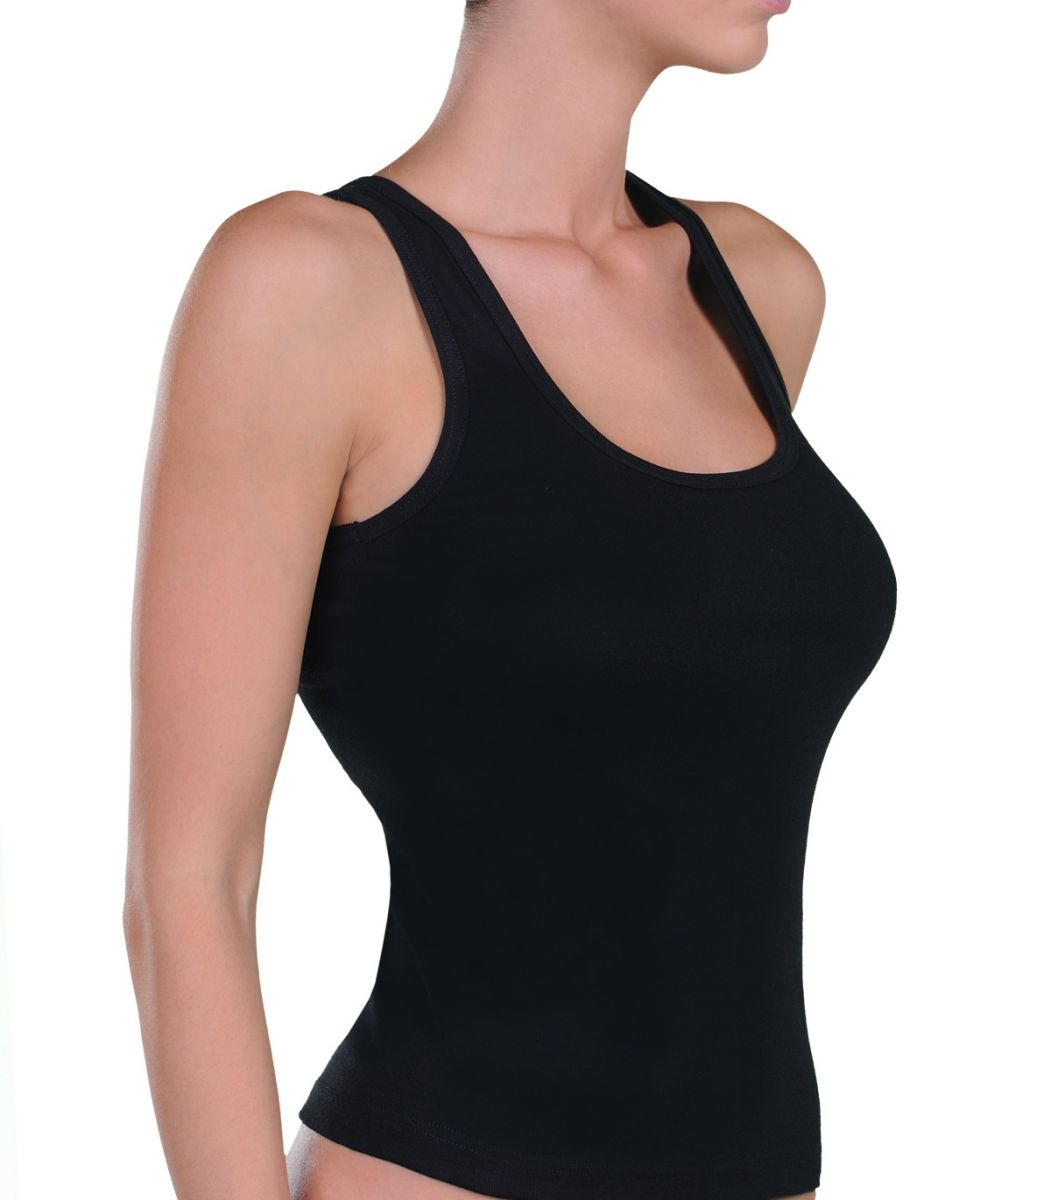 https://www.lord.gr/2502-large_default/lord-women-tank-top-athletic-back-cotton.jpg